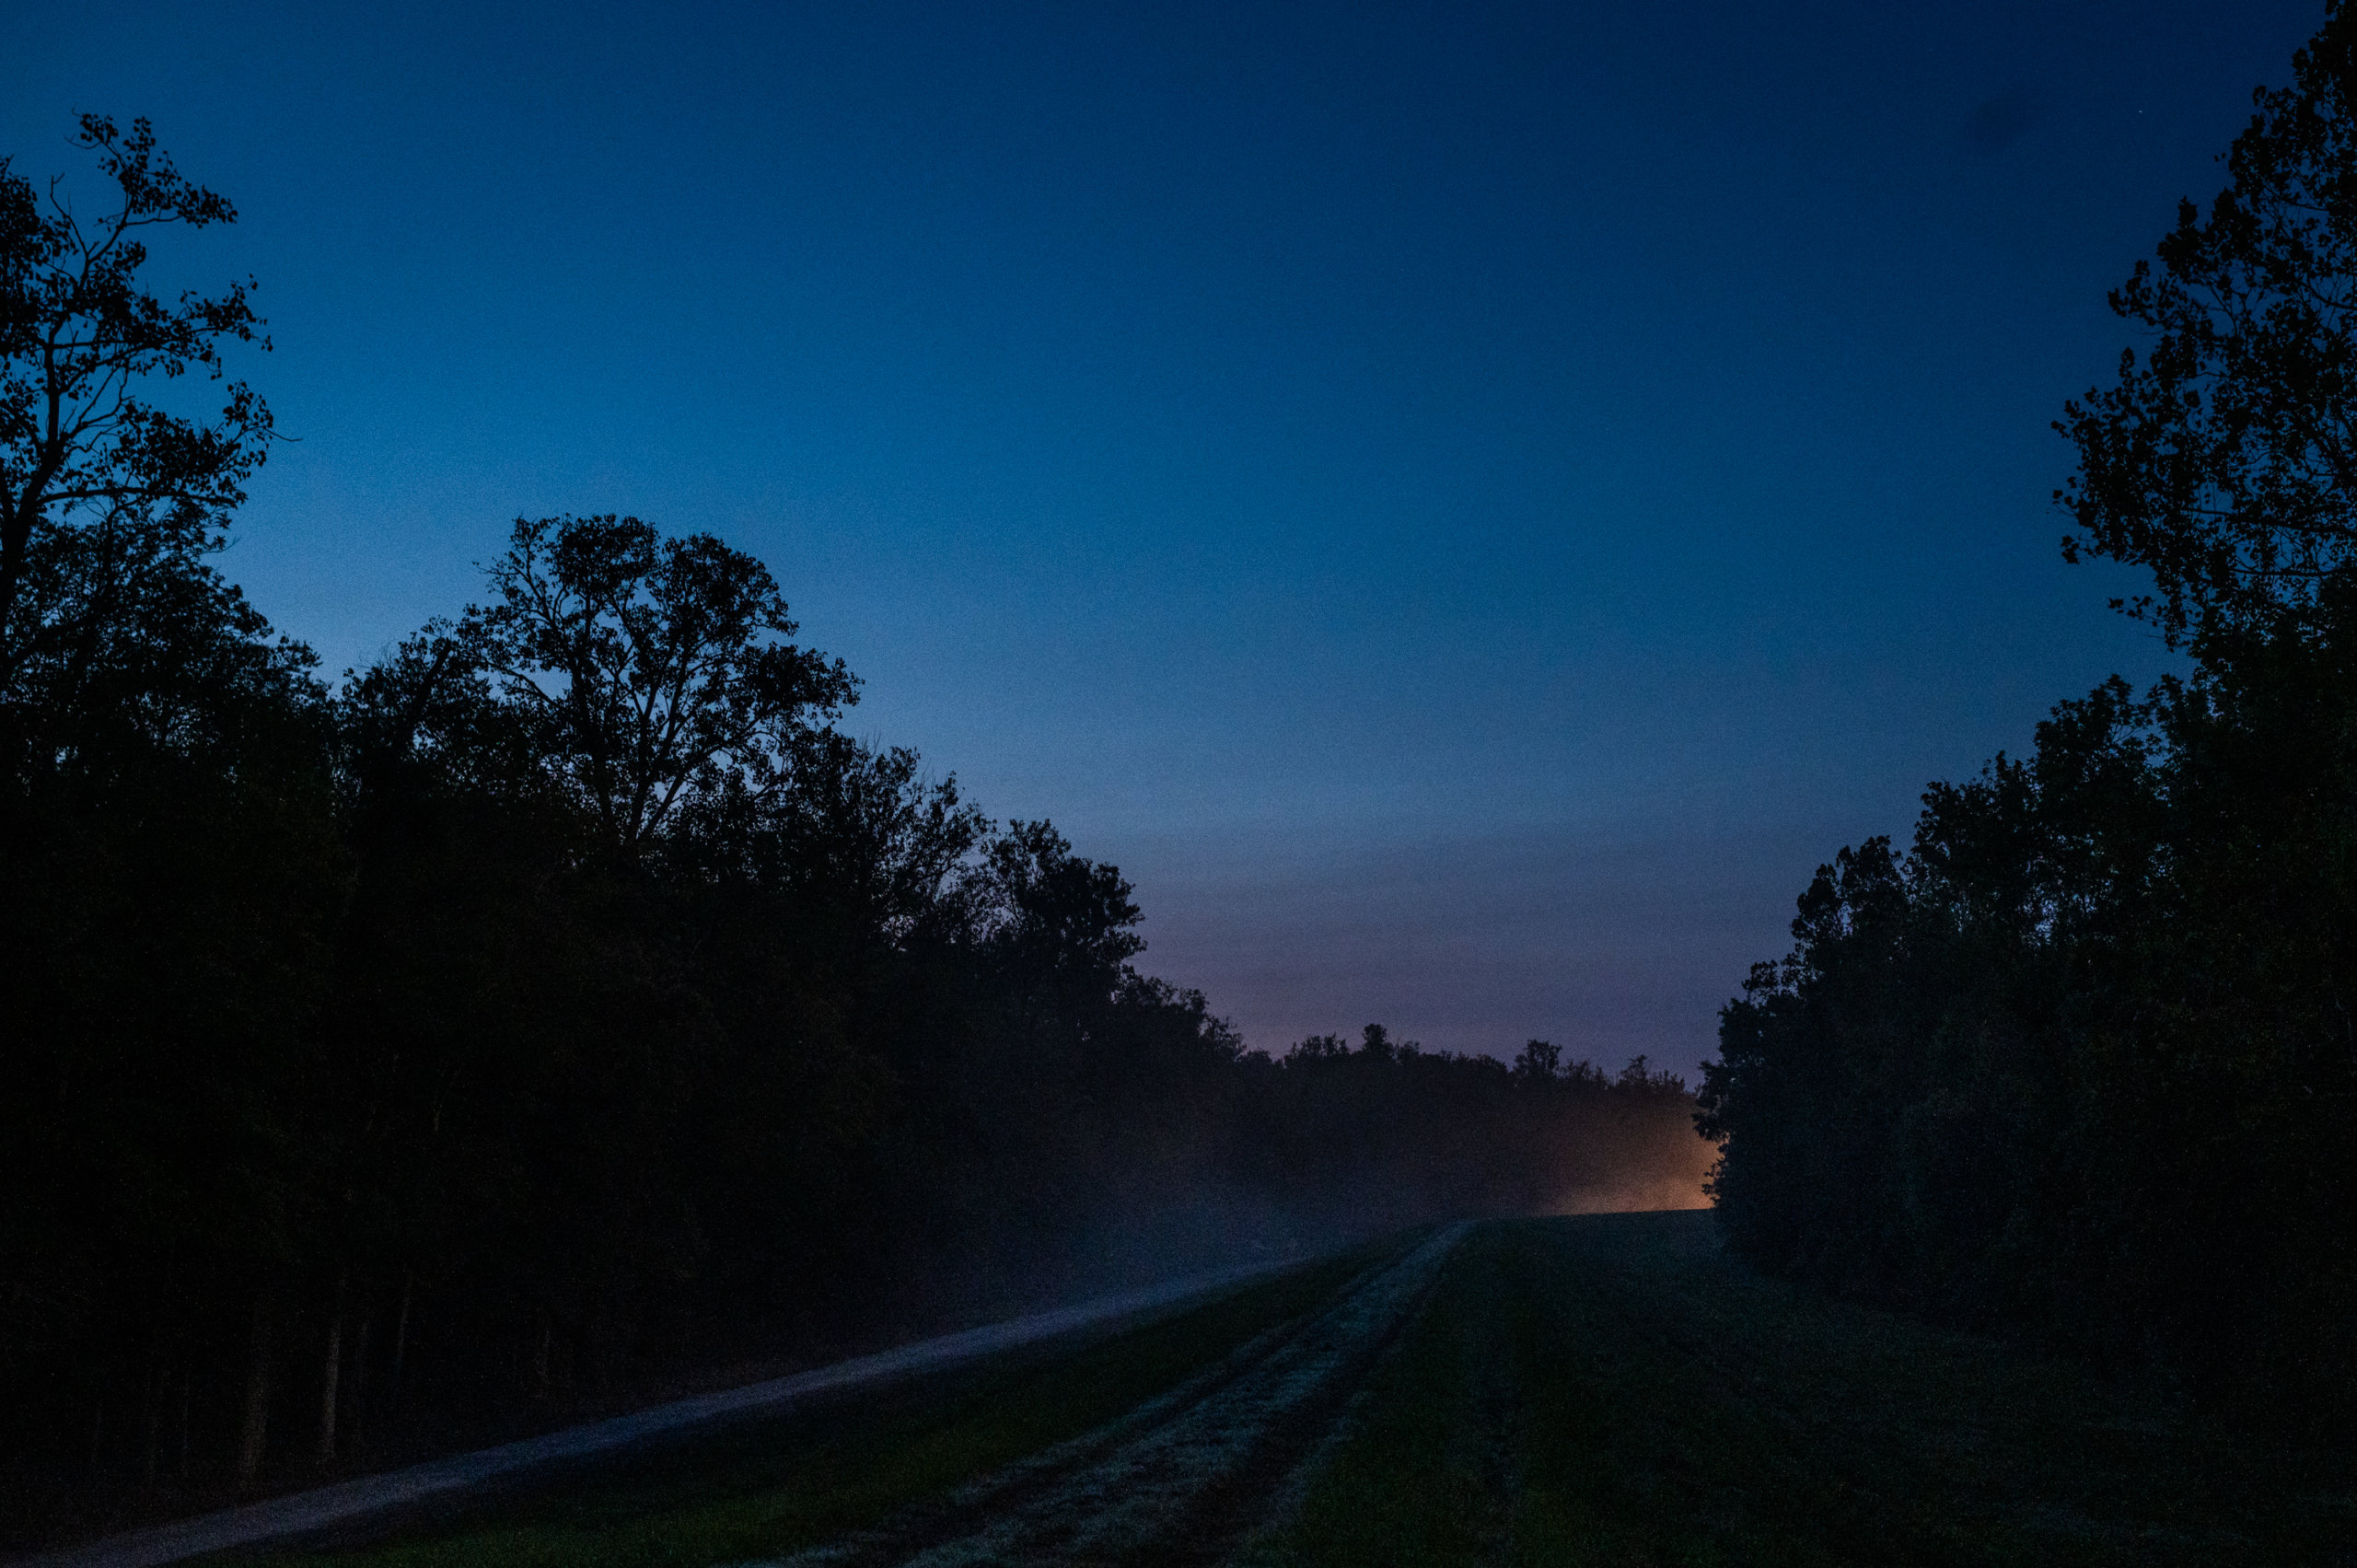 Headlights in the distance shine on a gravel road before sunrise